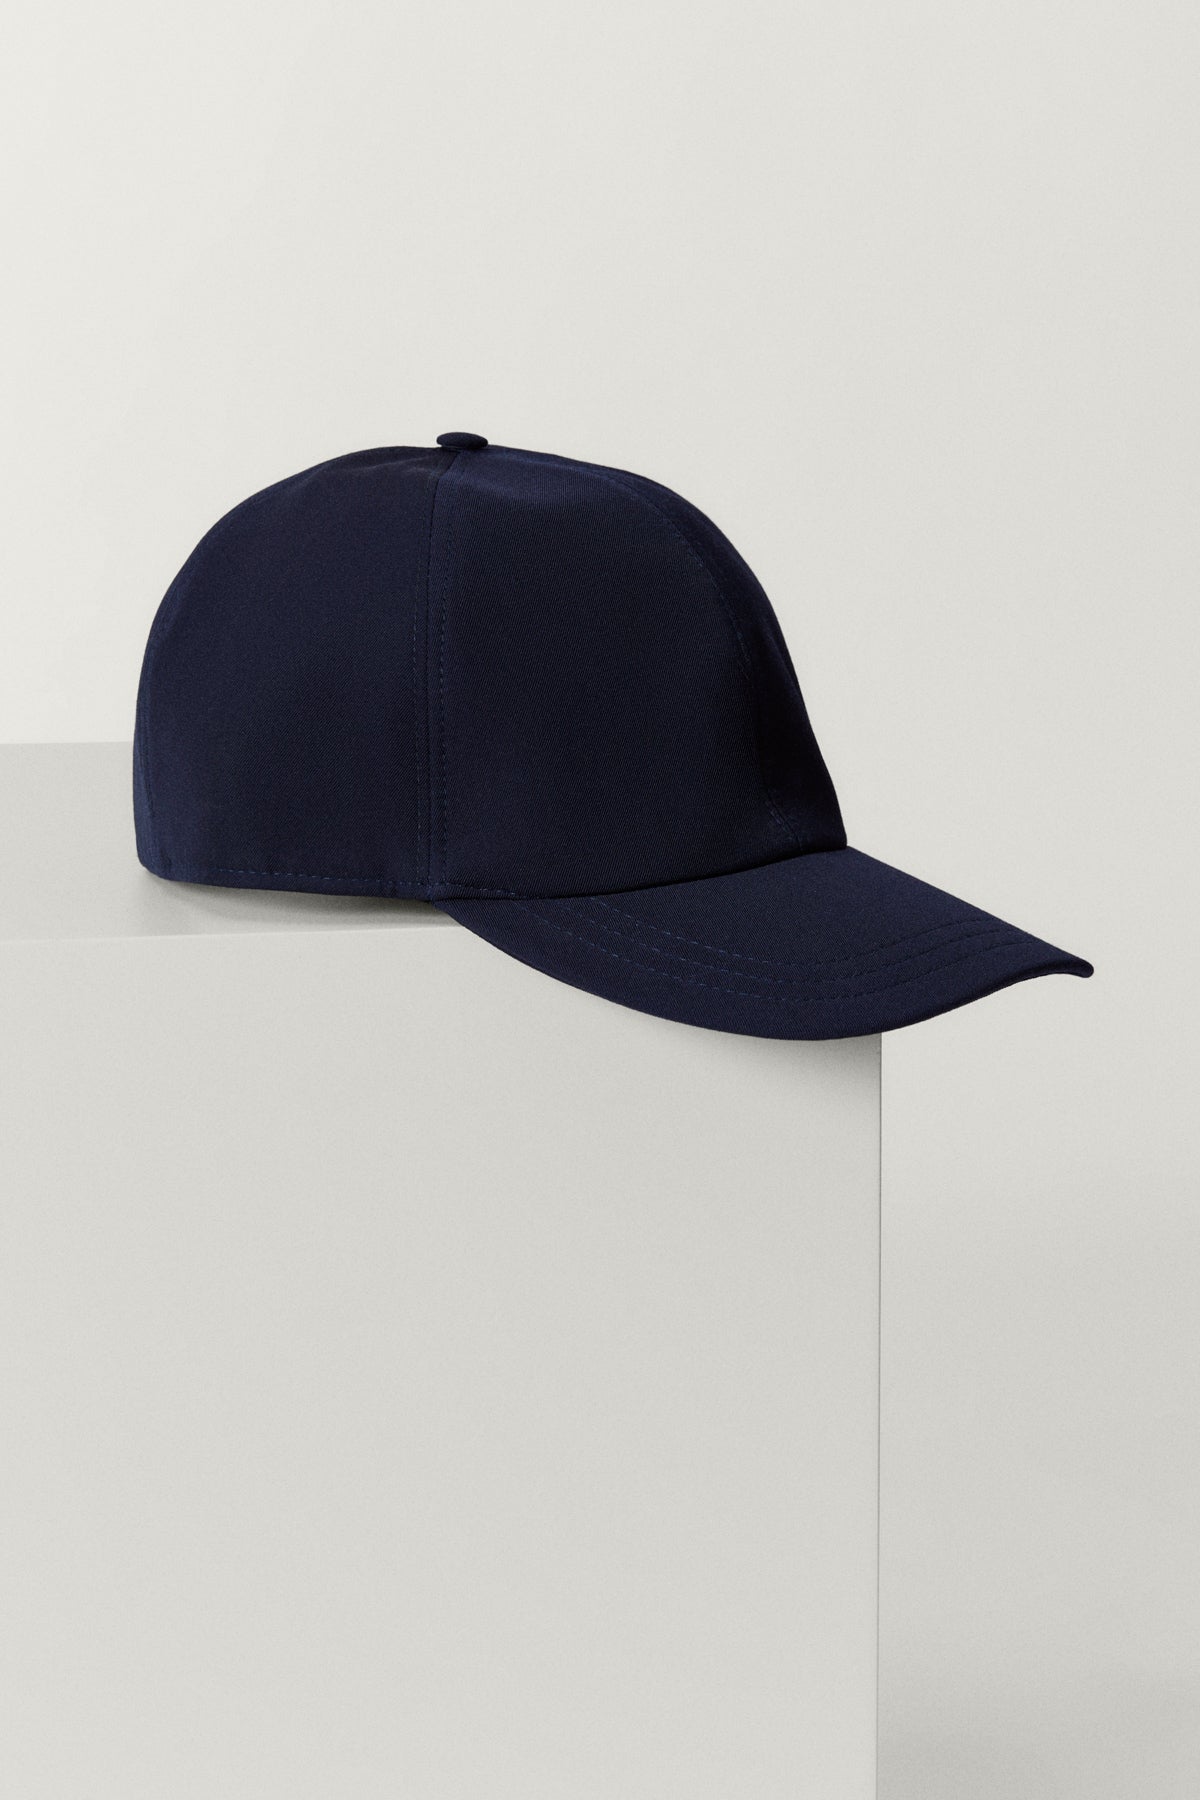 the cashmere baseball hat blue navy